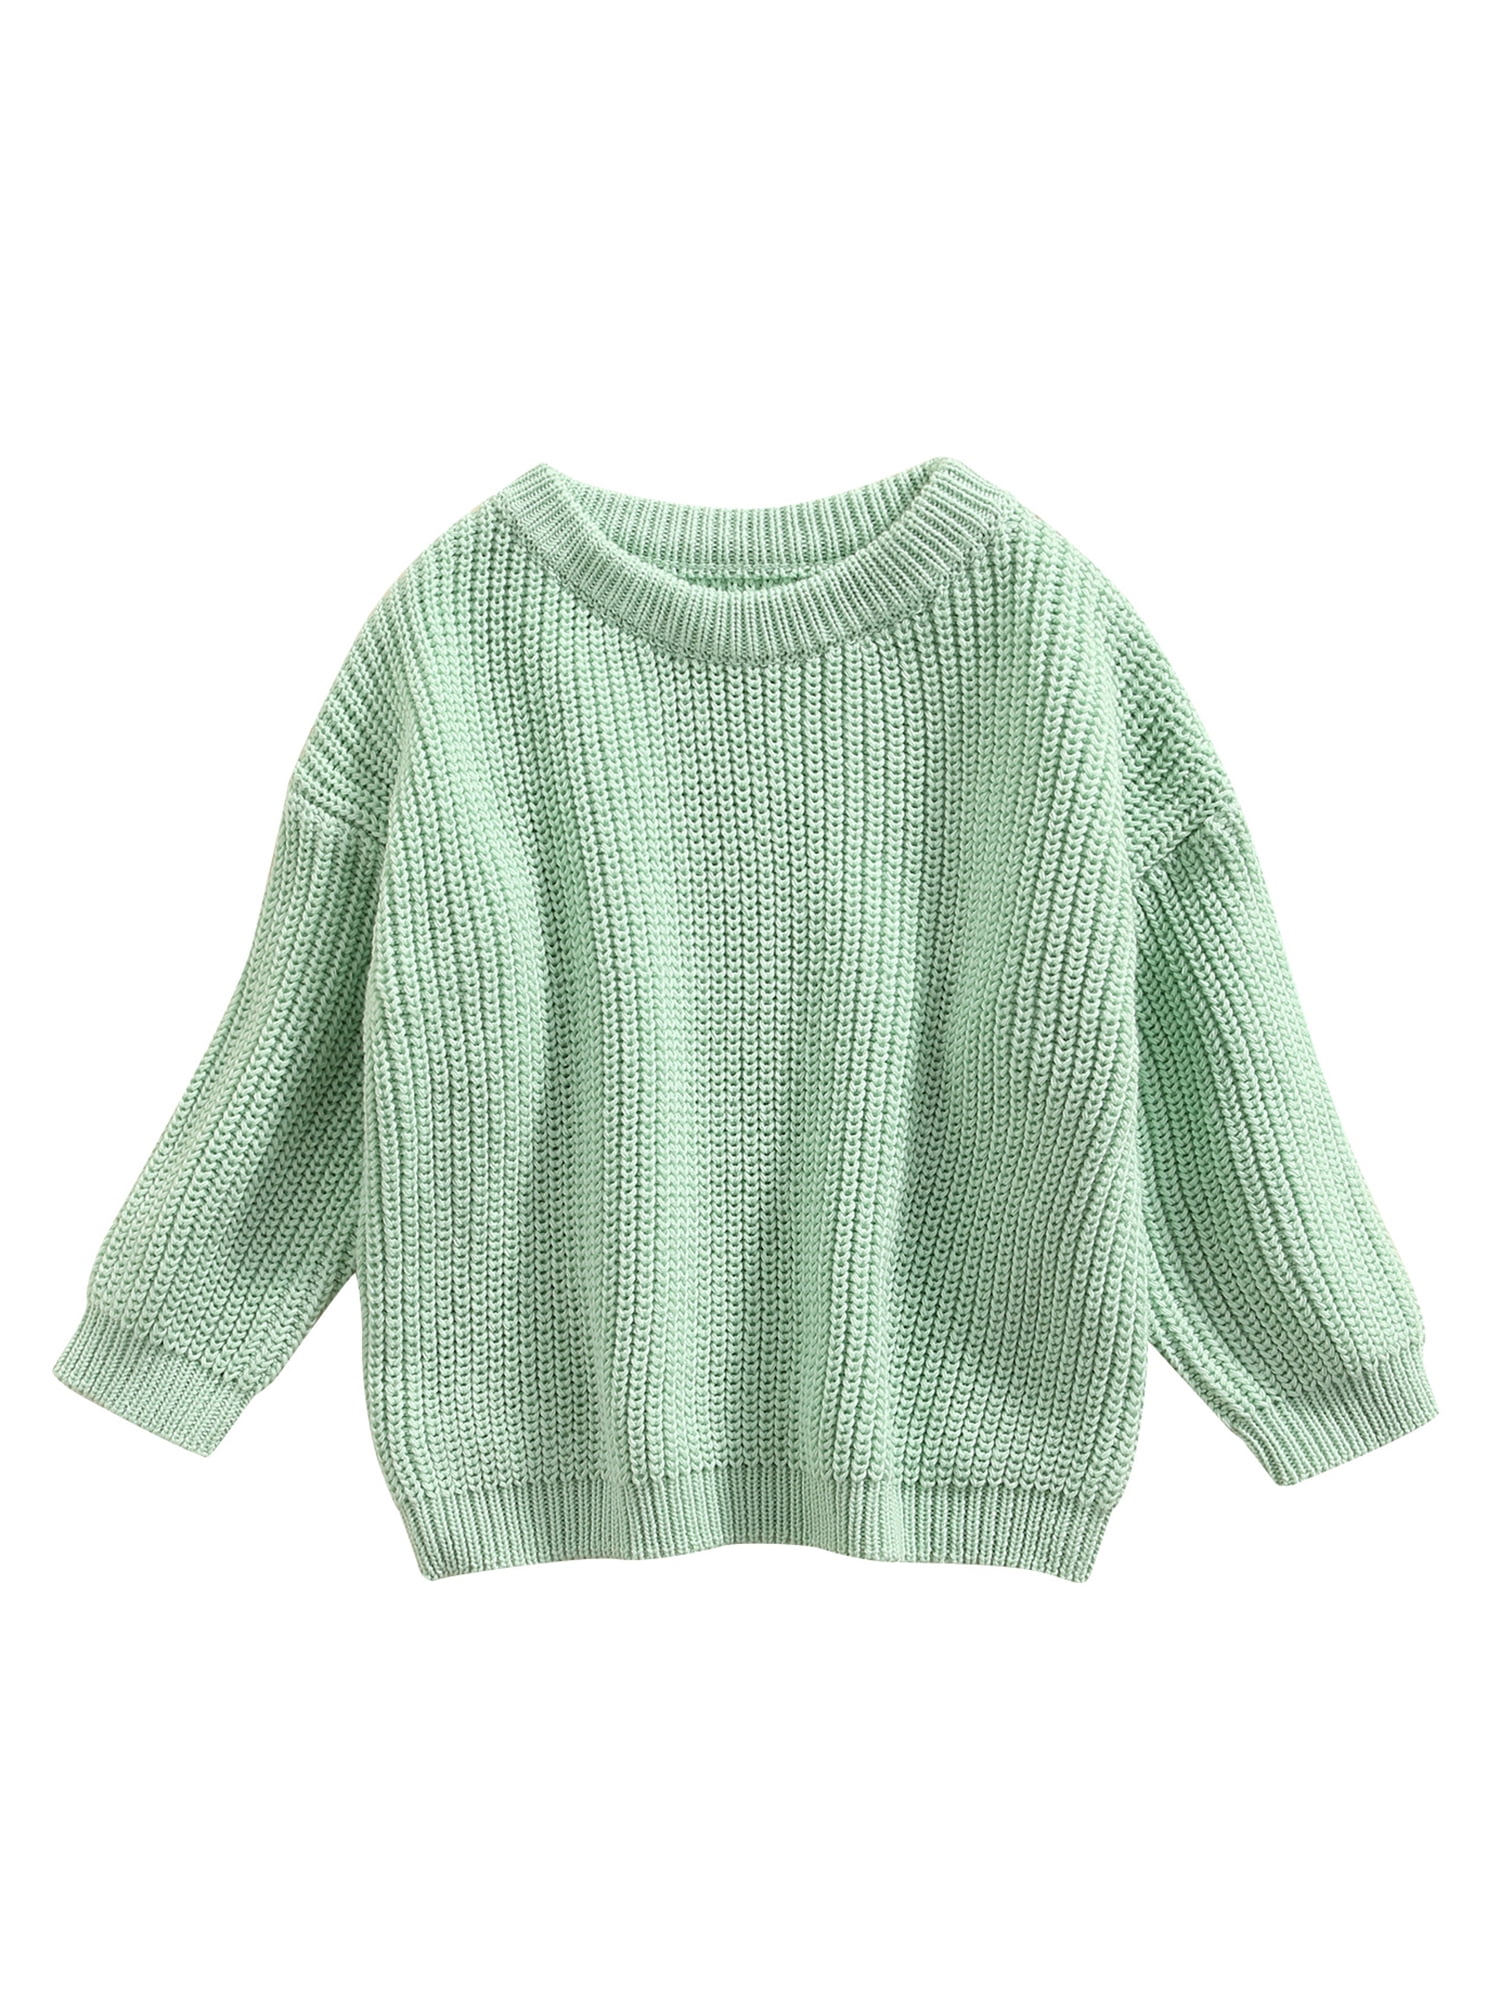 Toddler Baby Girls Fall Winter Clothing Long Sleeve Knitted Solid